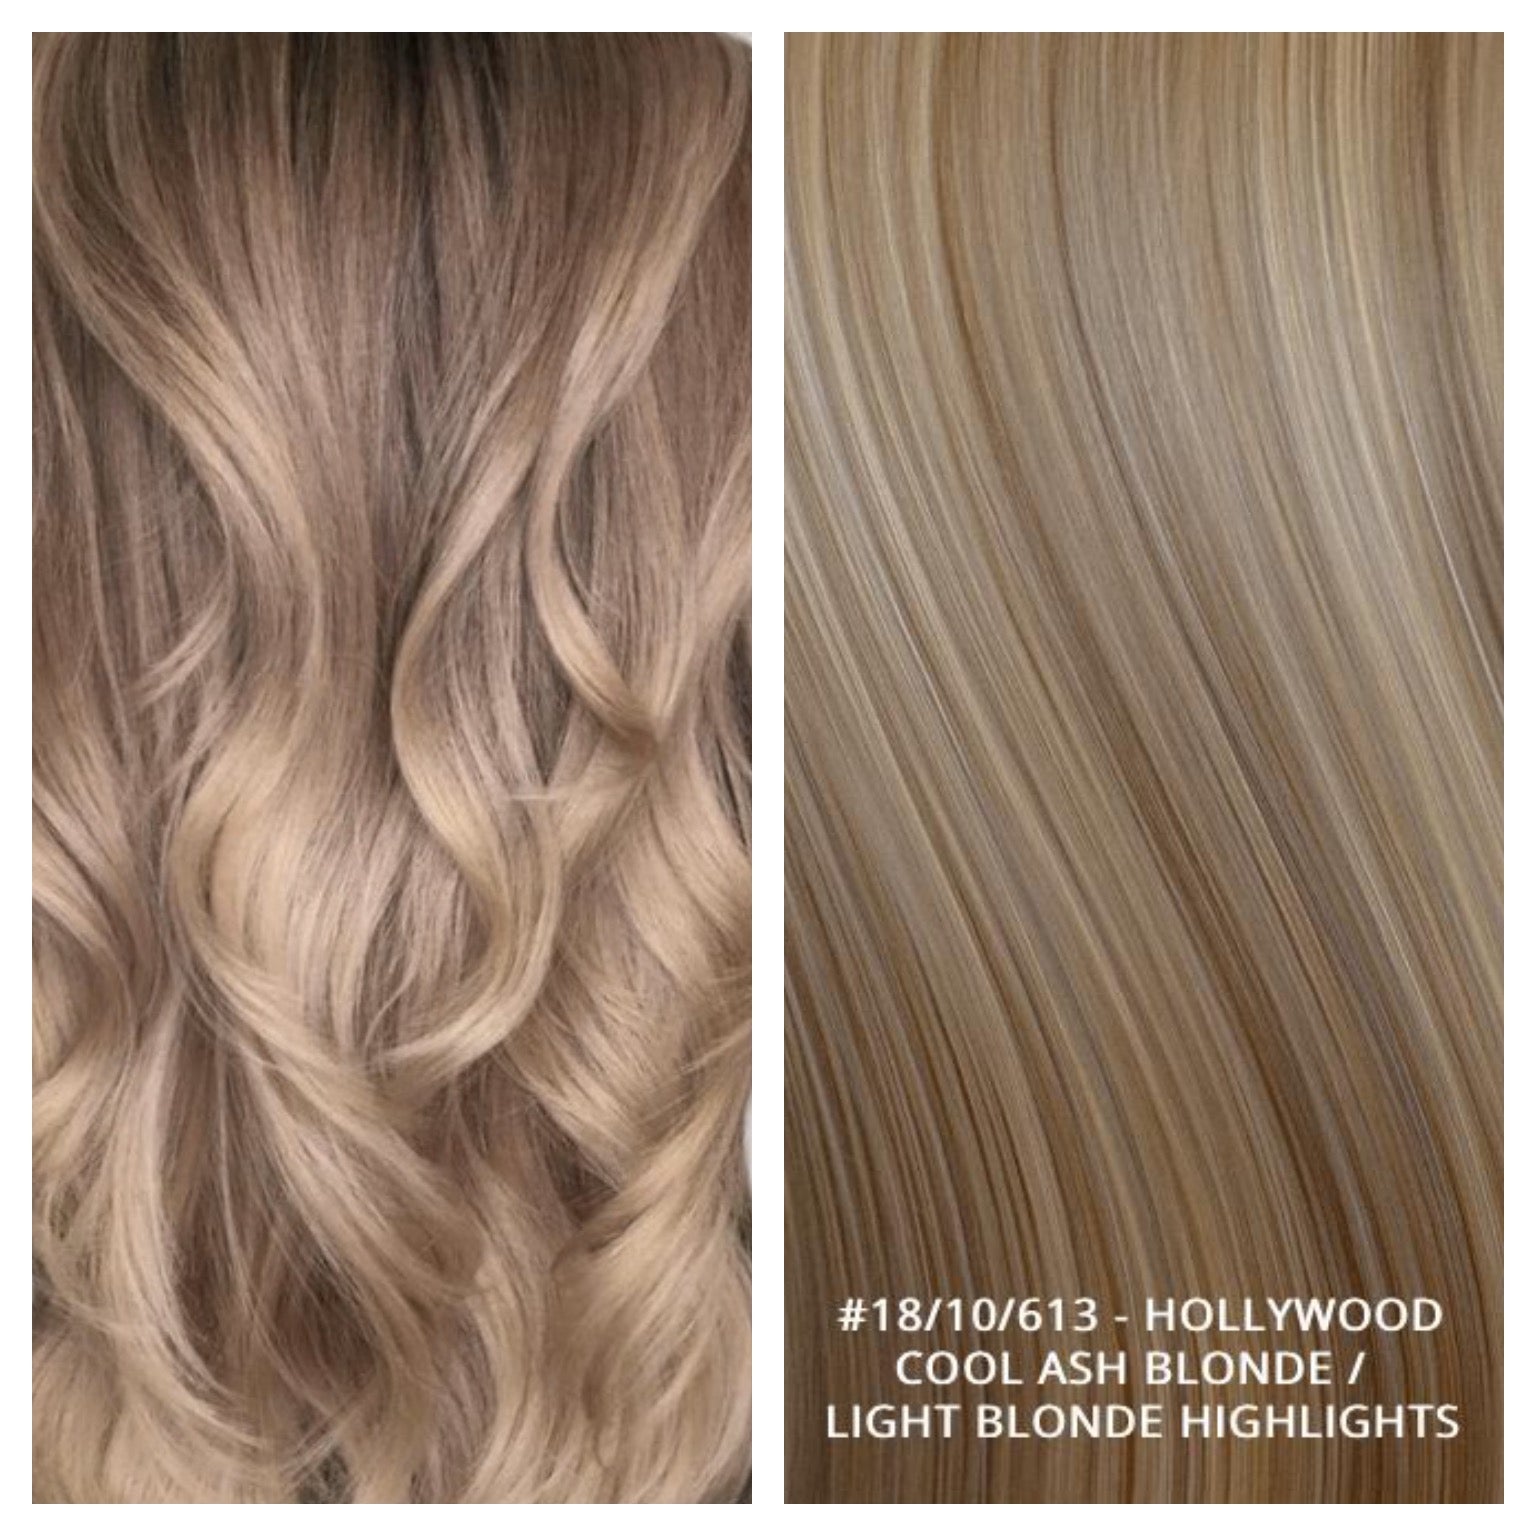 RUSSIAN TAPE HAIR EXTENSIONS HIGHLIGHTS #18/10/613 - HOLLYWOOD - COOL ASH BLONDE / LIGHT BLONDE HIGHLIGHTS